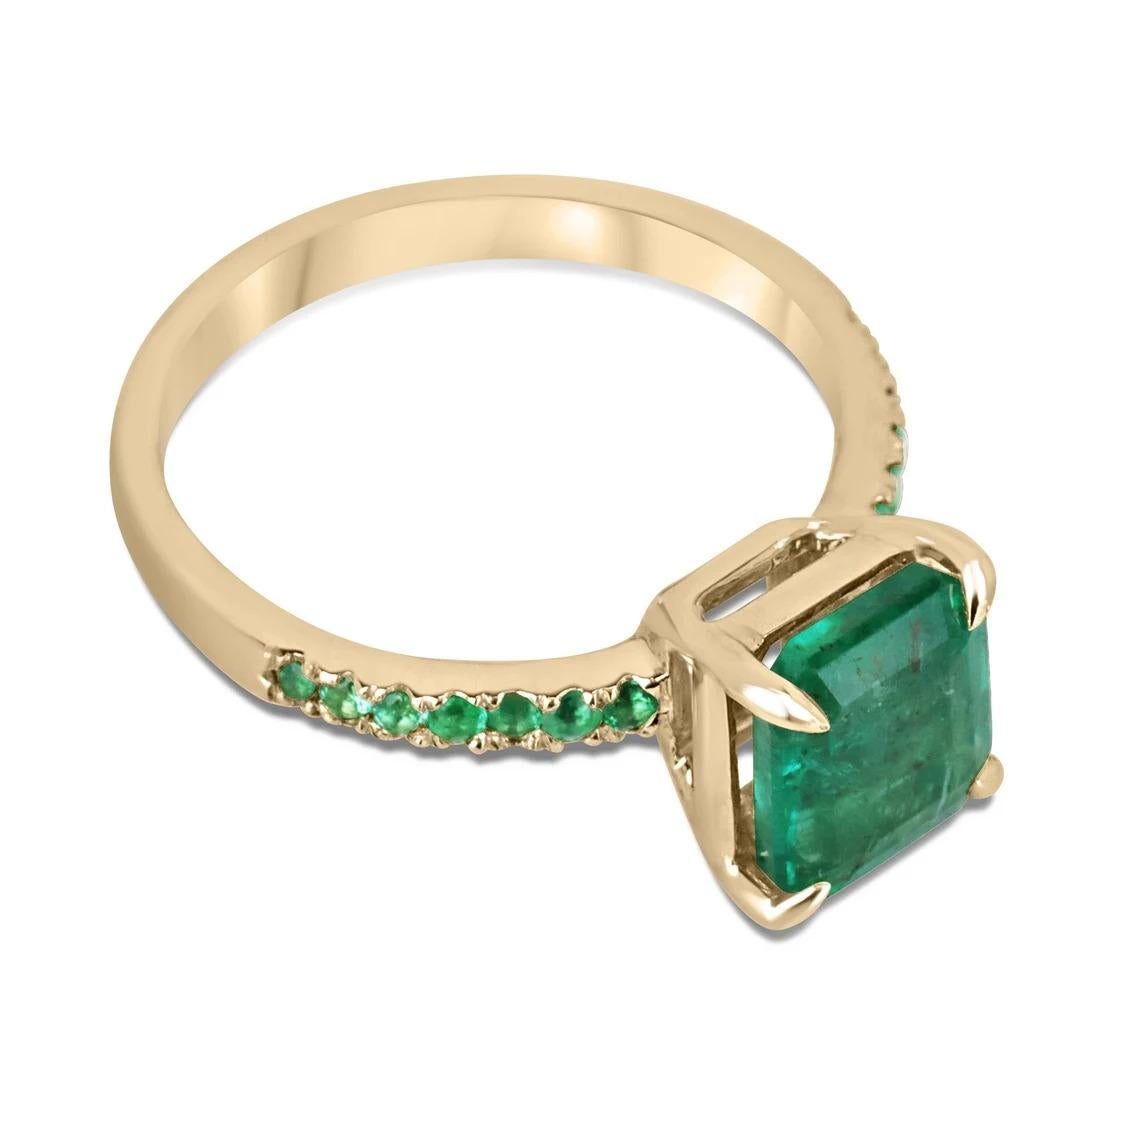 This is a one-of-a-kind, all-emerald solitaire with accents engagement or right-hand ring. This piece features a stunning 2.15-carat natural emerald that is emerald cut, with a rich, lush green color that is sure to capture attention. The emerald is